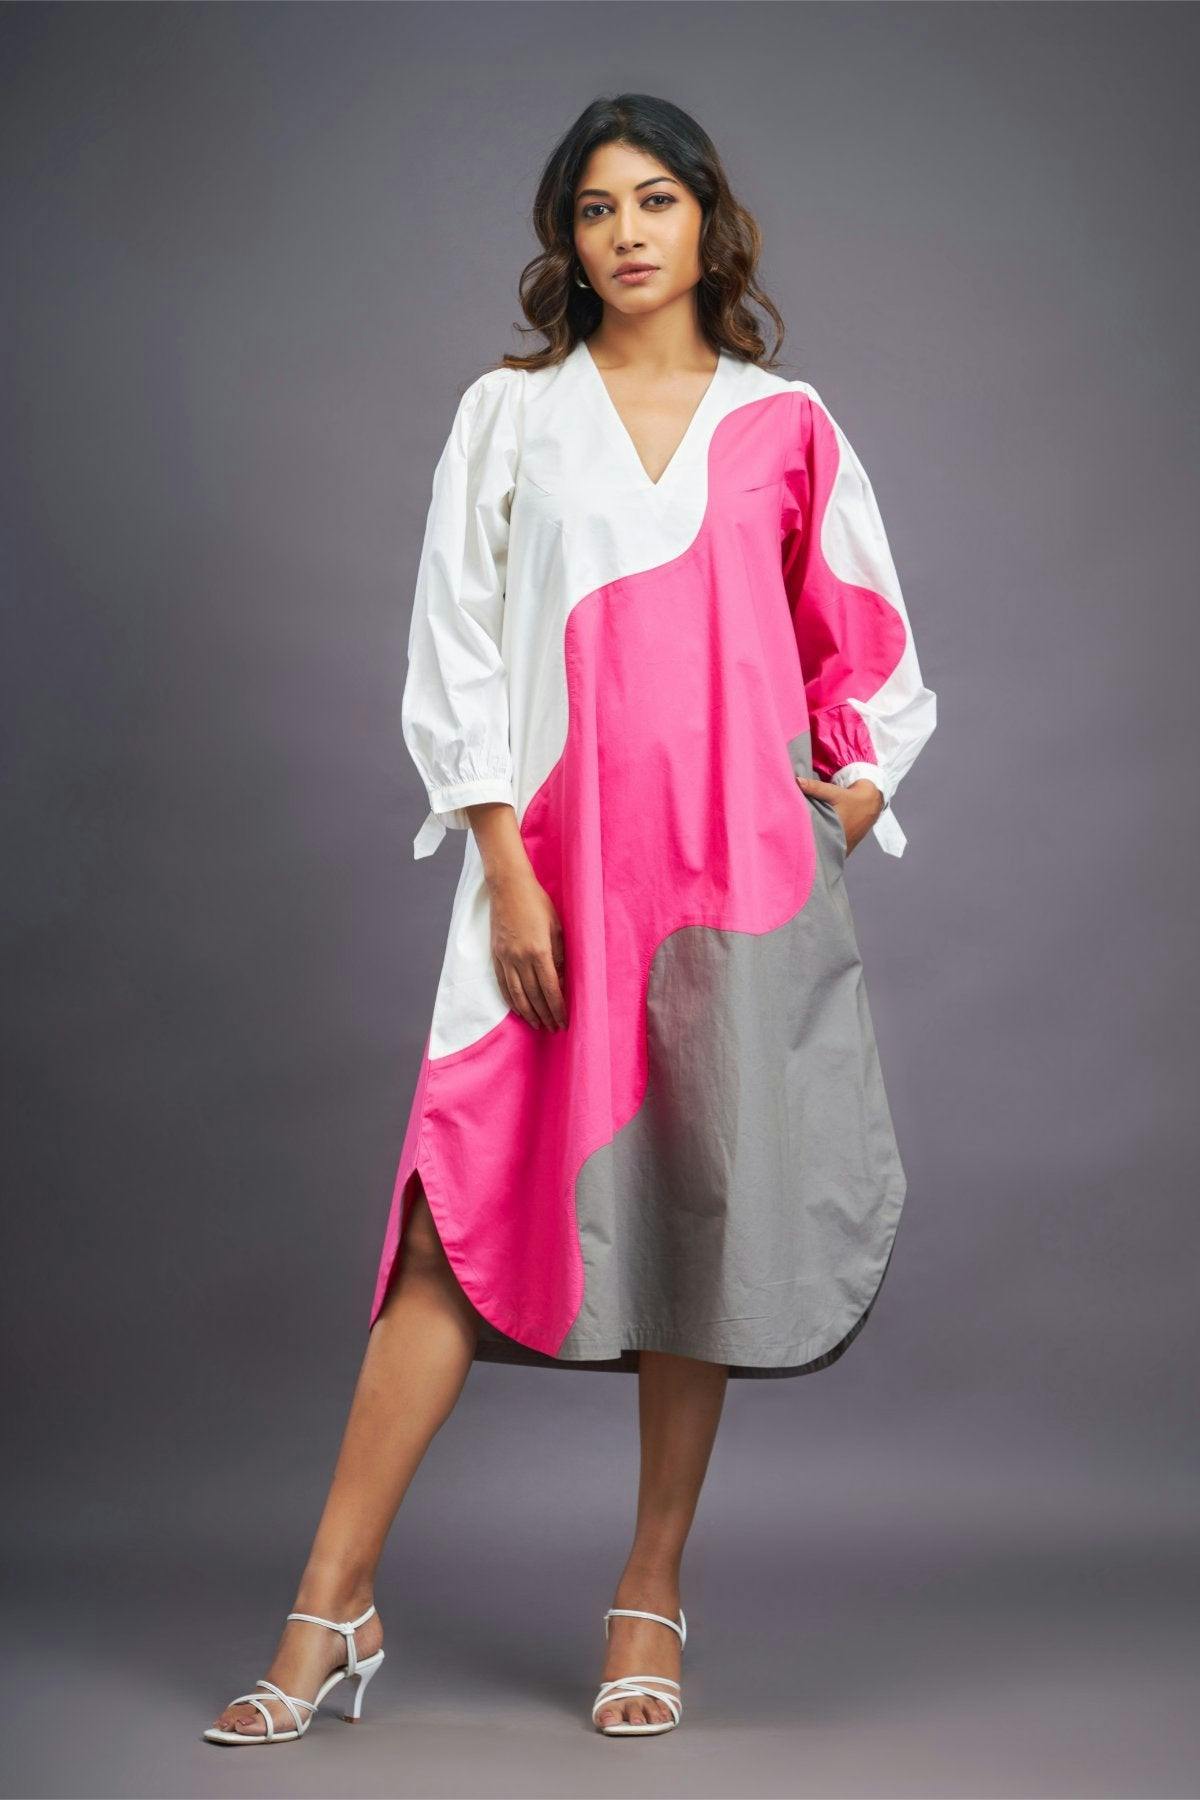 White Pink Oversized Dress, a product by Deepika Arora